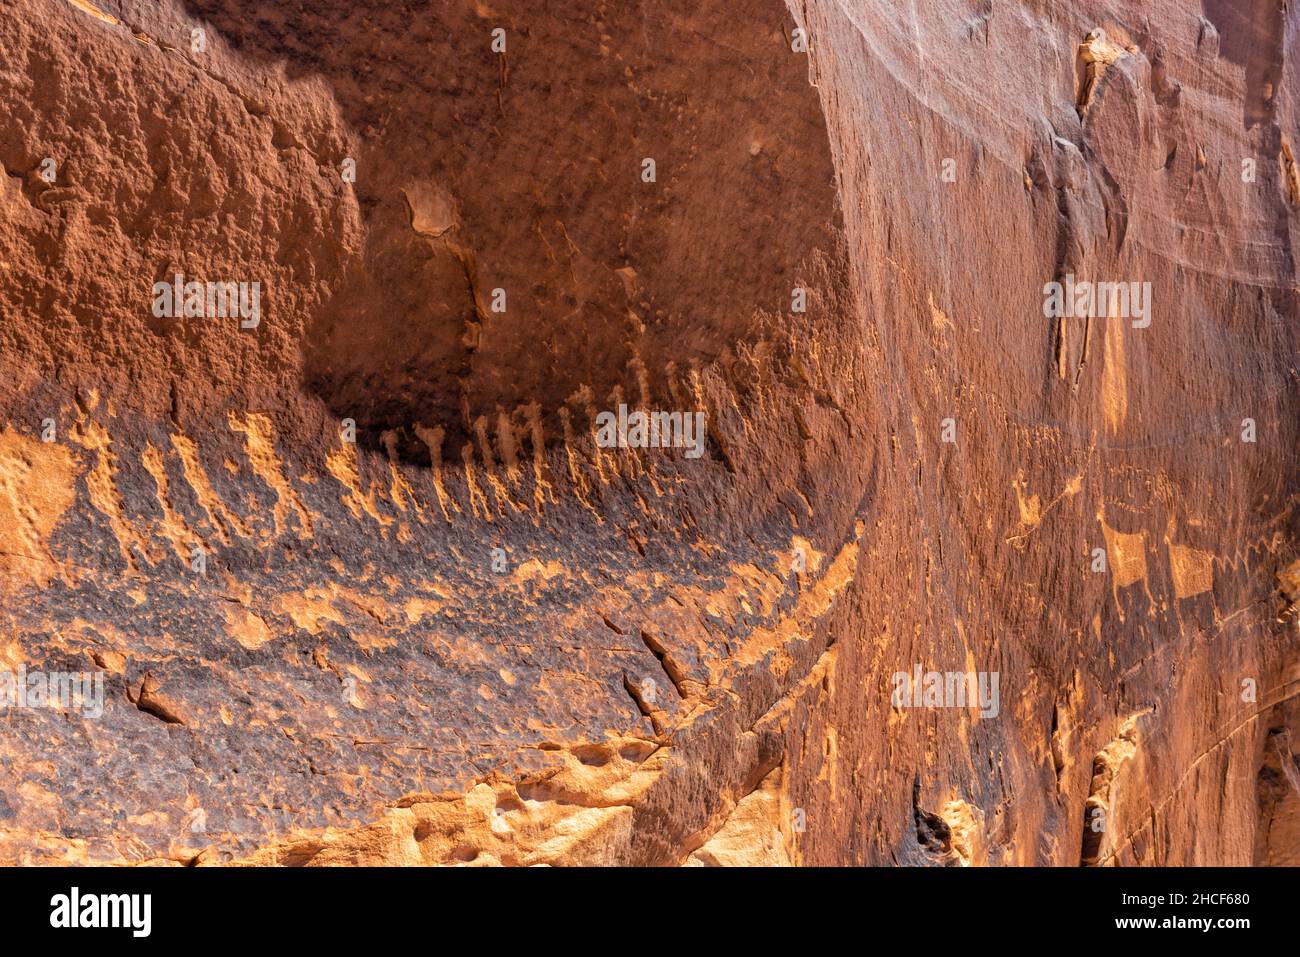 A line of figures leads into the Procession Panel, a well-known Ancetral Puebloan petroglyph panel near the top of Comb Ridge in Bears Ears National M Stock Photo